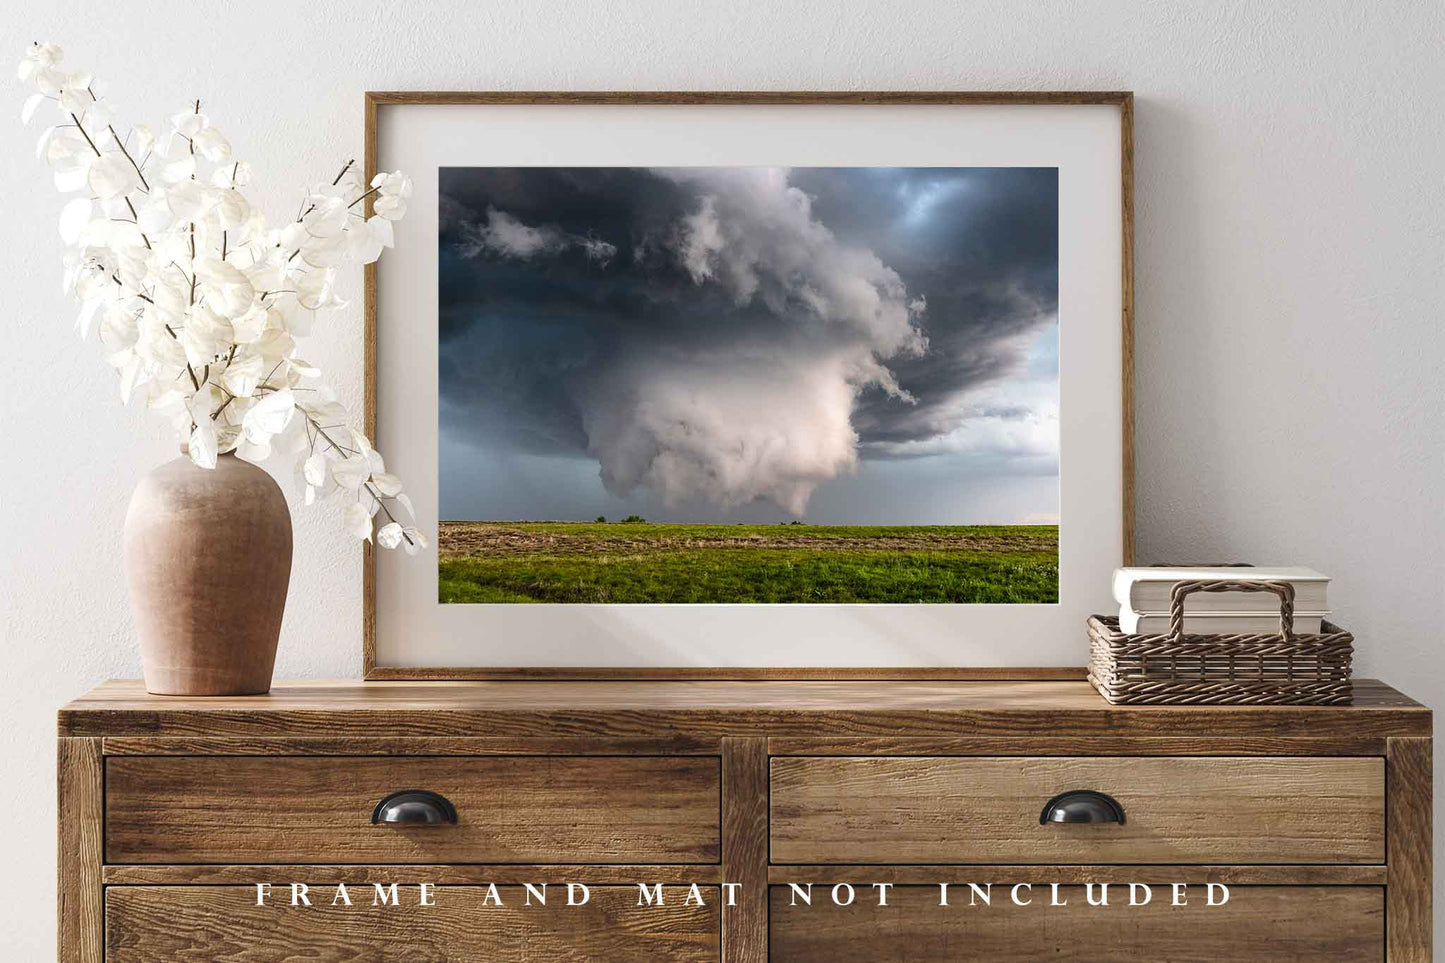 Supercell Thunderstorm Photo Print | Storm Picture | Oklahoma Wall Art | Extreme Weather Photography | Nature Decor